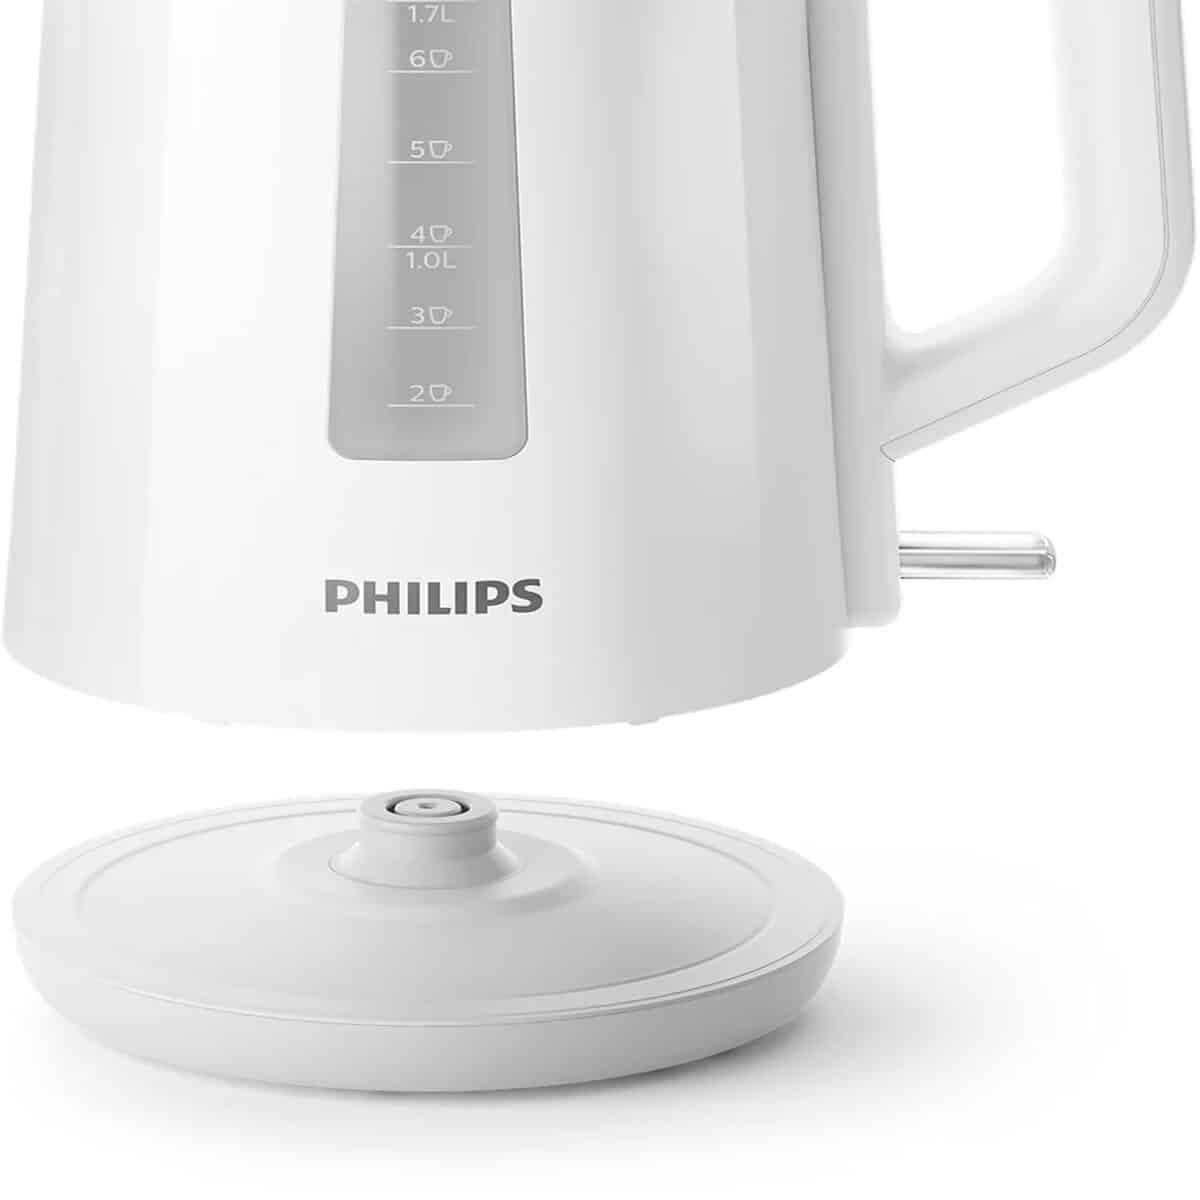 Philips 1.7L Kettle – HD9318/01 White